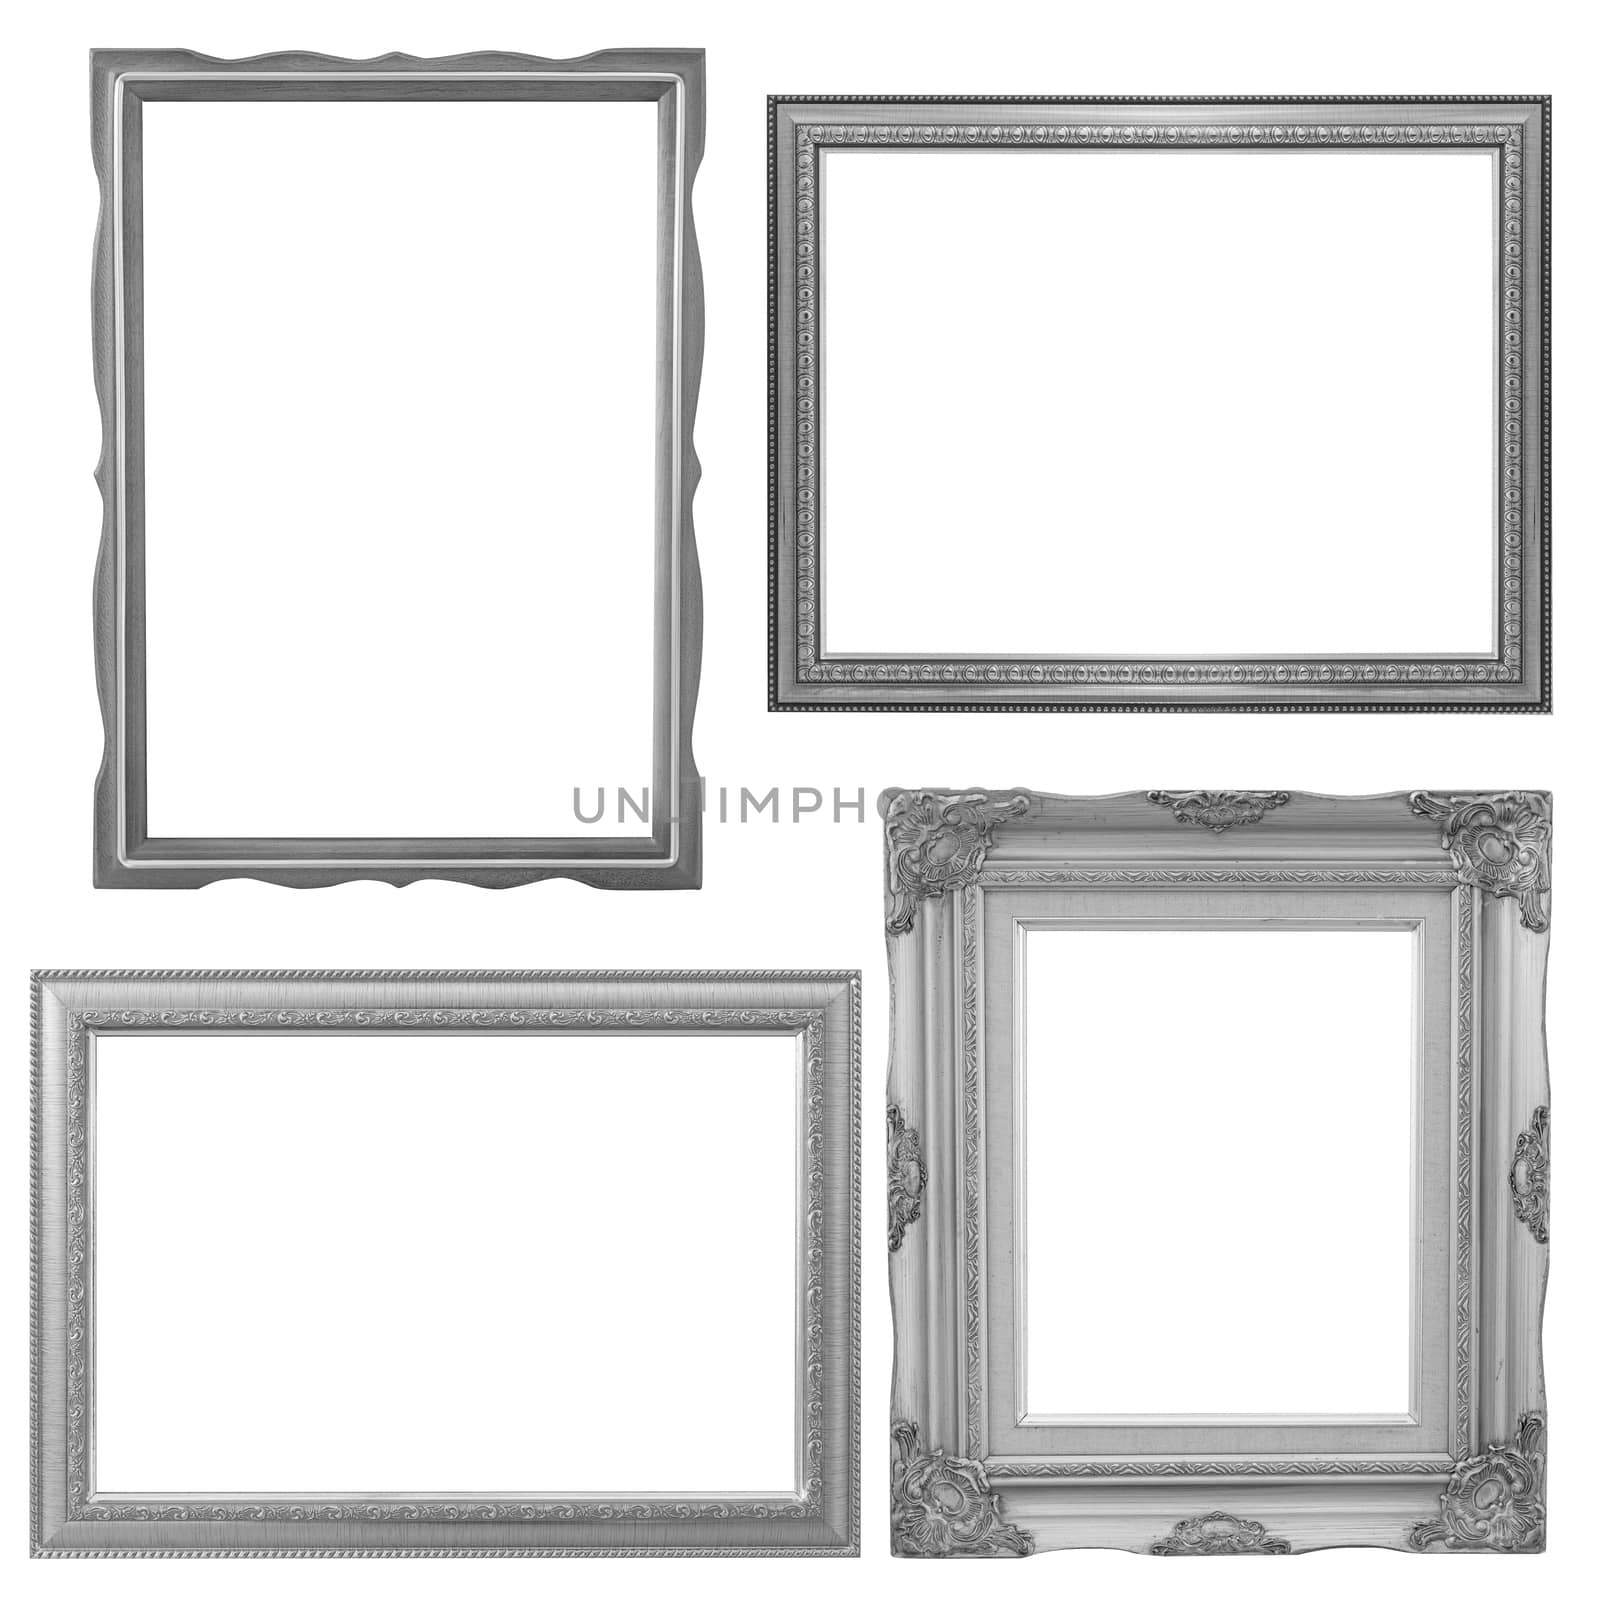 Set of silver frame and wood vintage isolated on white backgroun by jayzynism